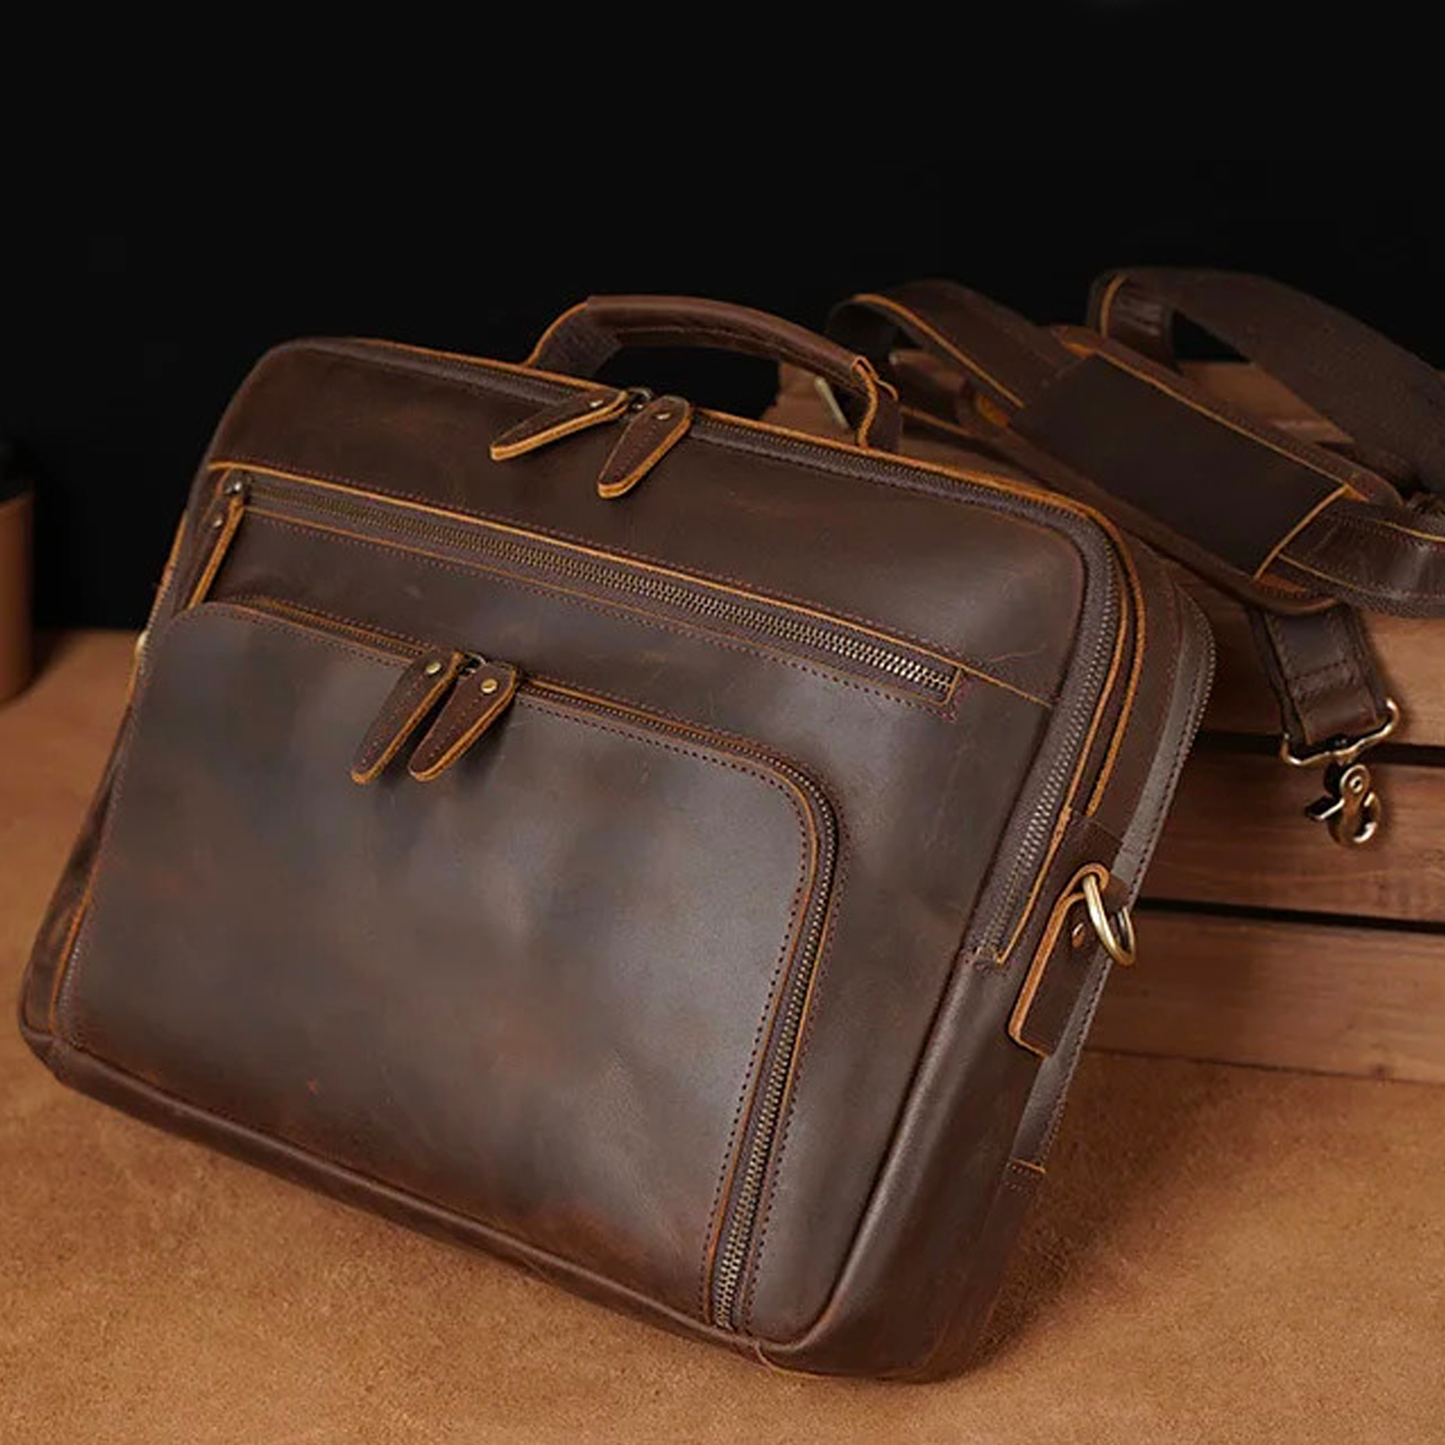 Men's business briefcase made of genuine leather 